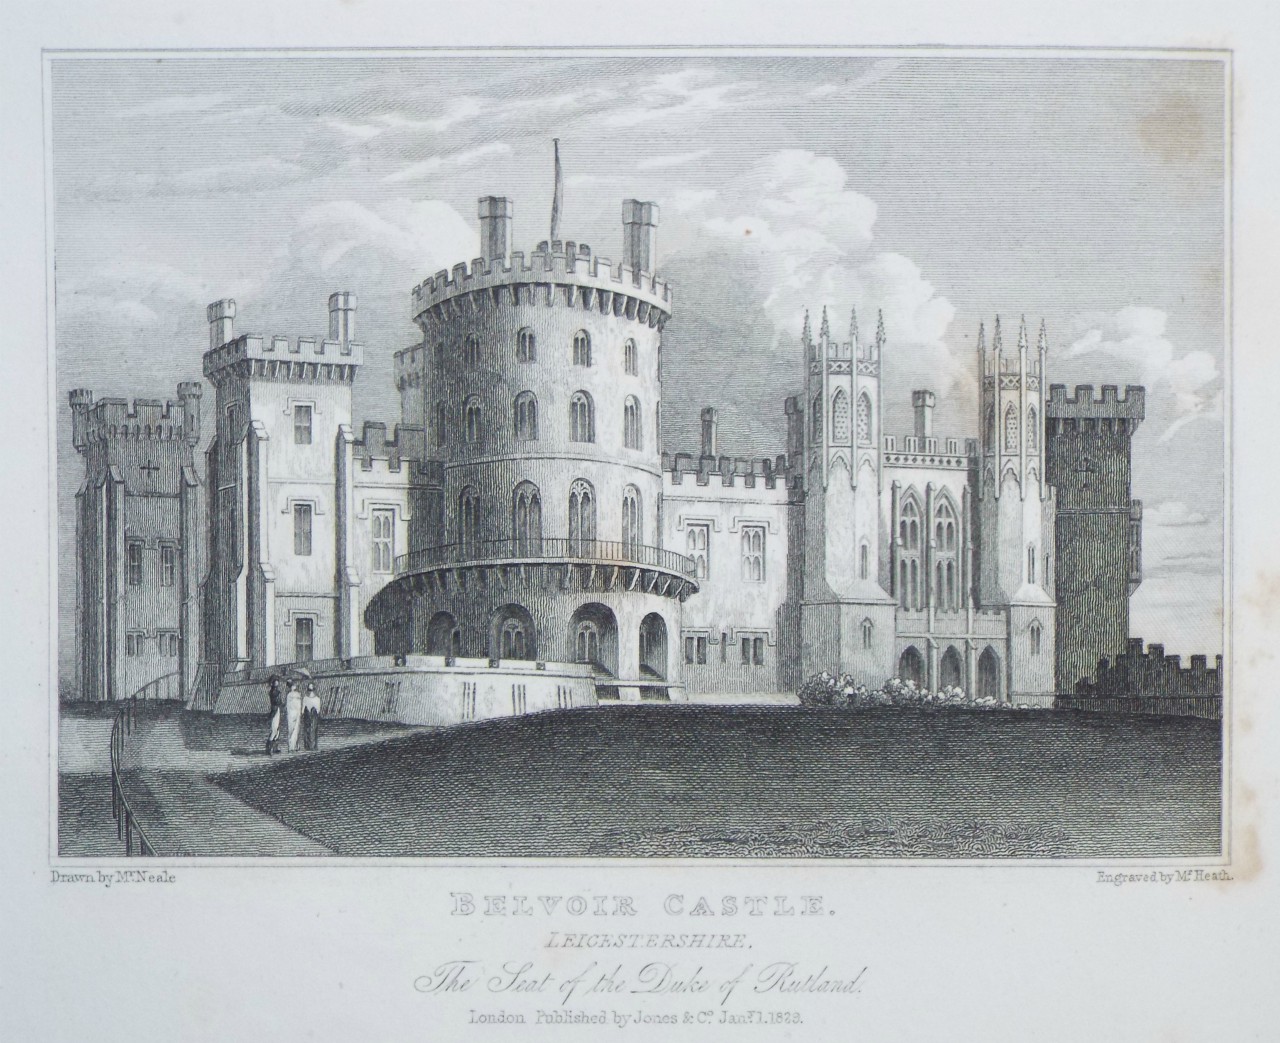 Print - Belvoir Castle, Leicestershire. The Seat of the Duke of Rutland. - 